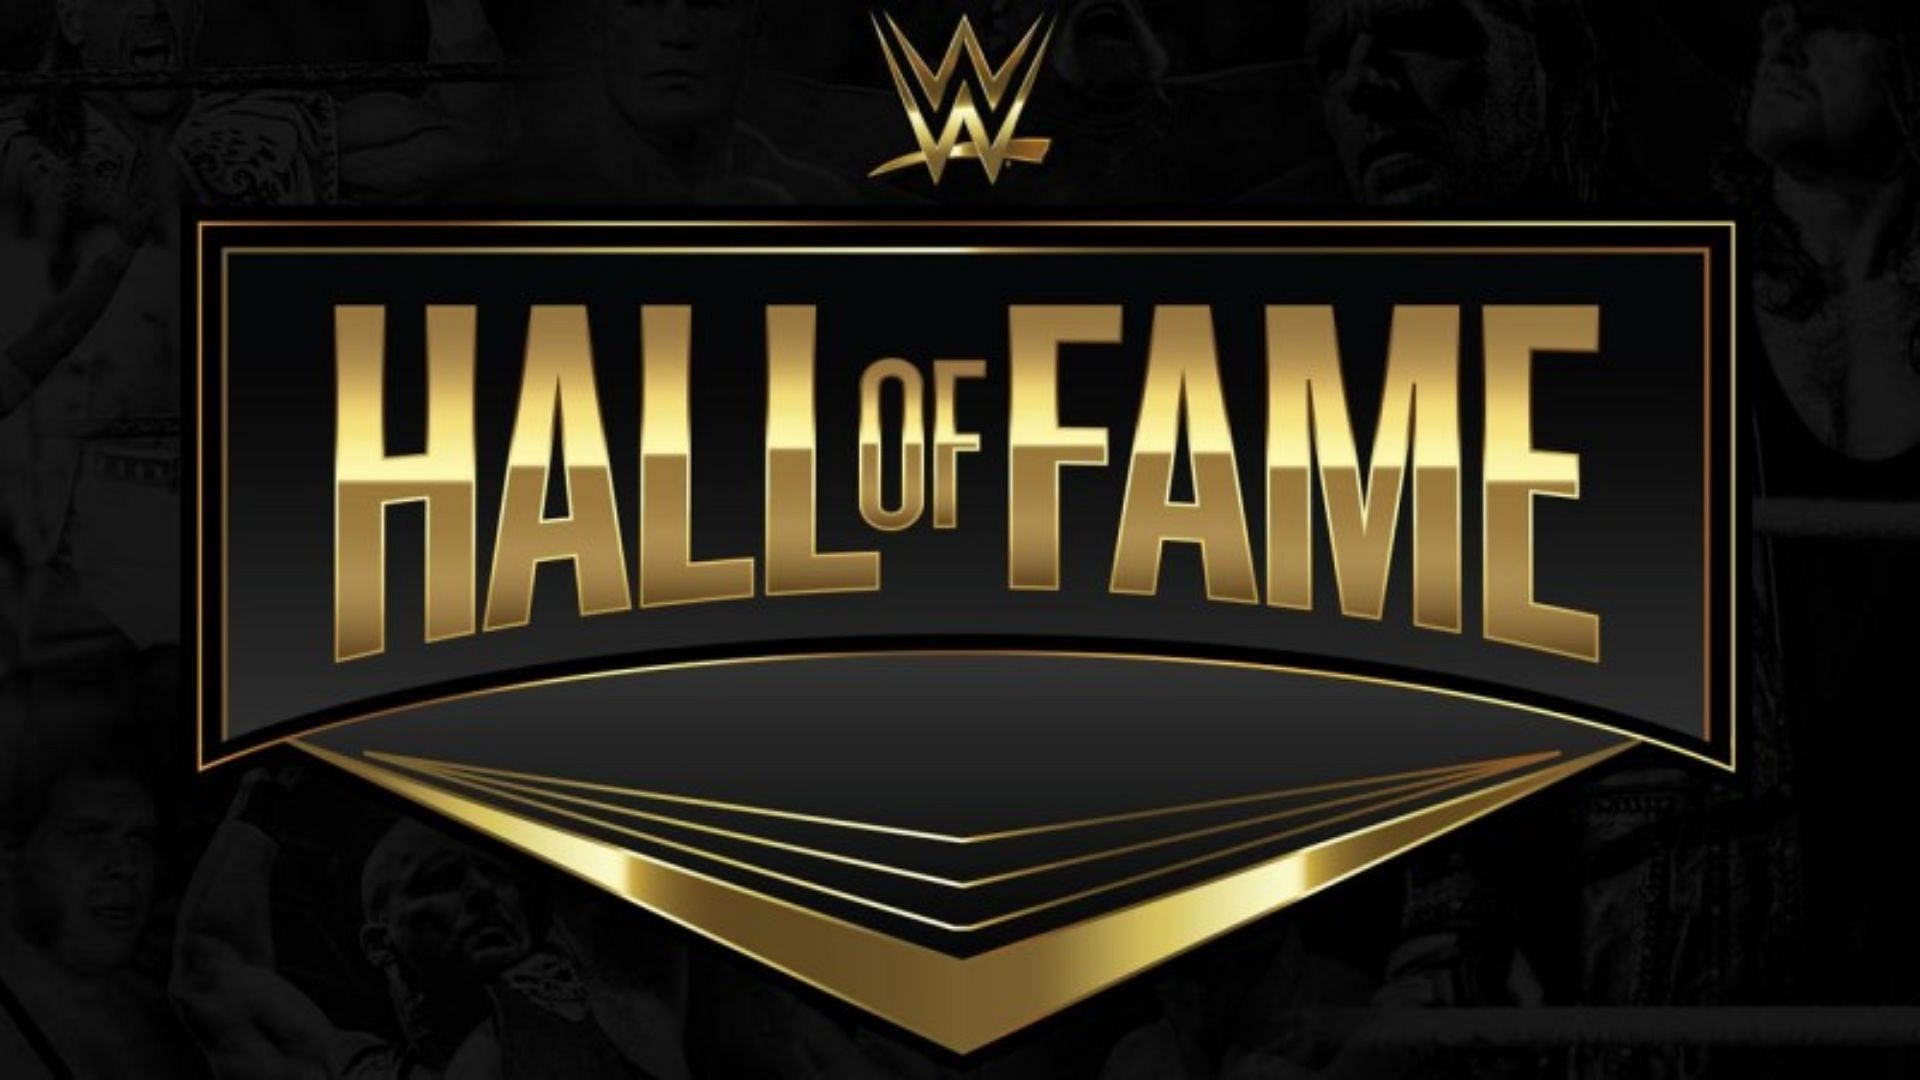 WWE Hall of Fame 2023 will take place on March 31st in Los Angeles, California.